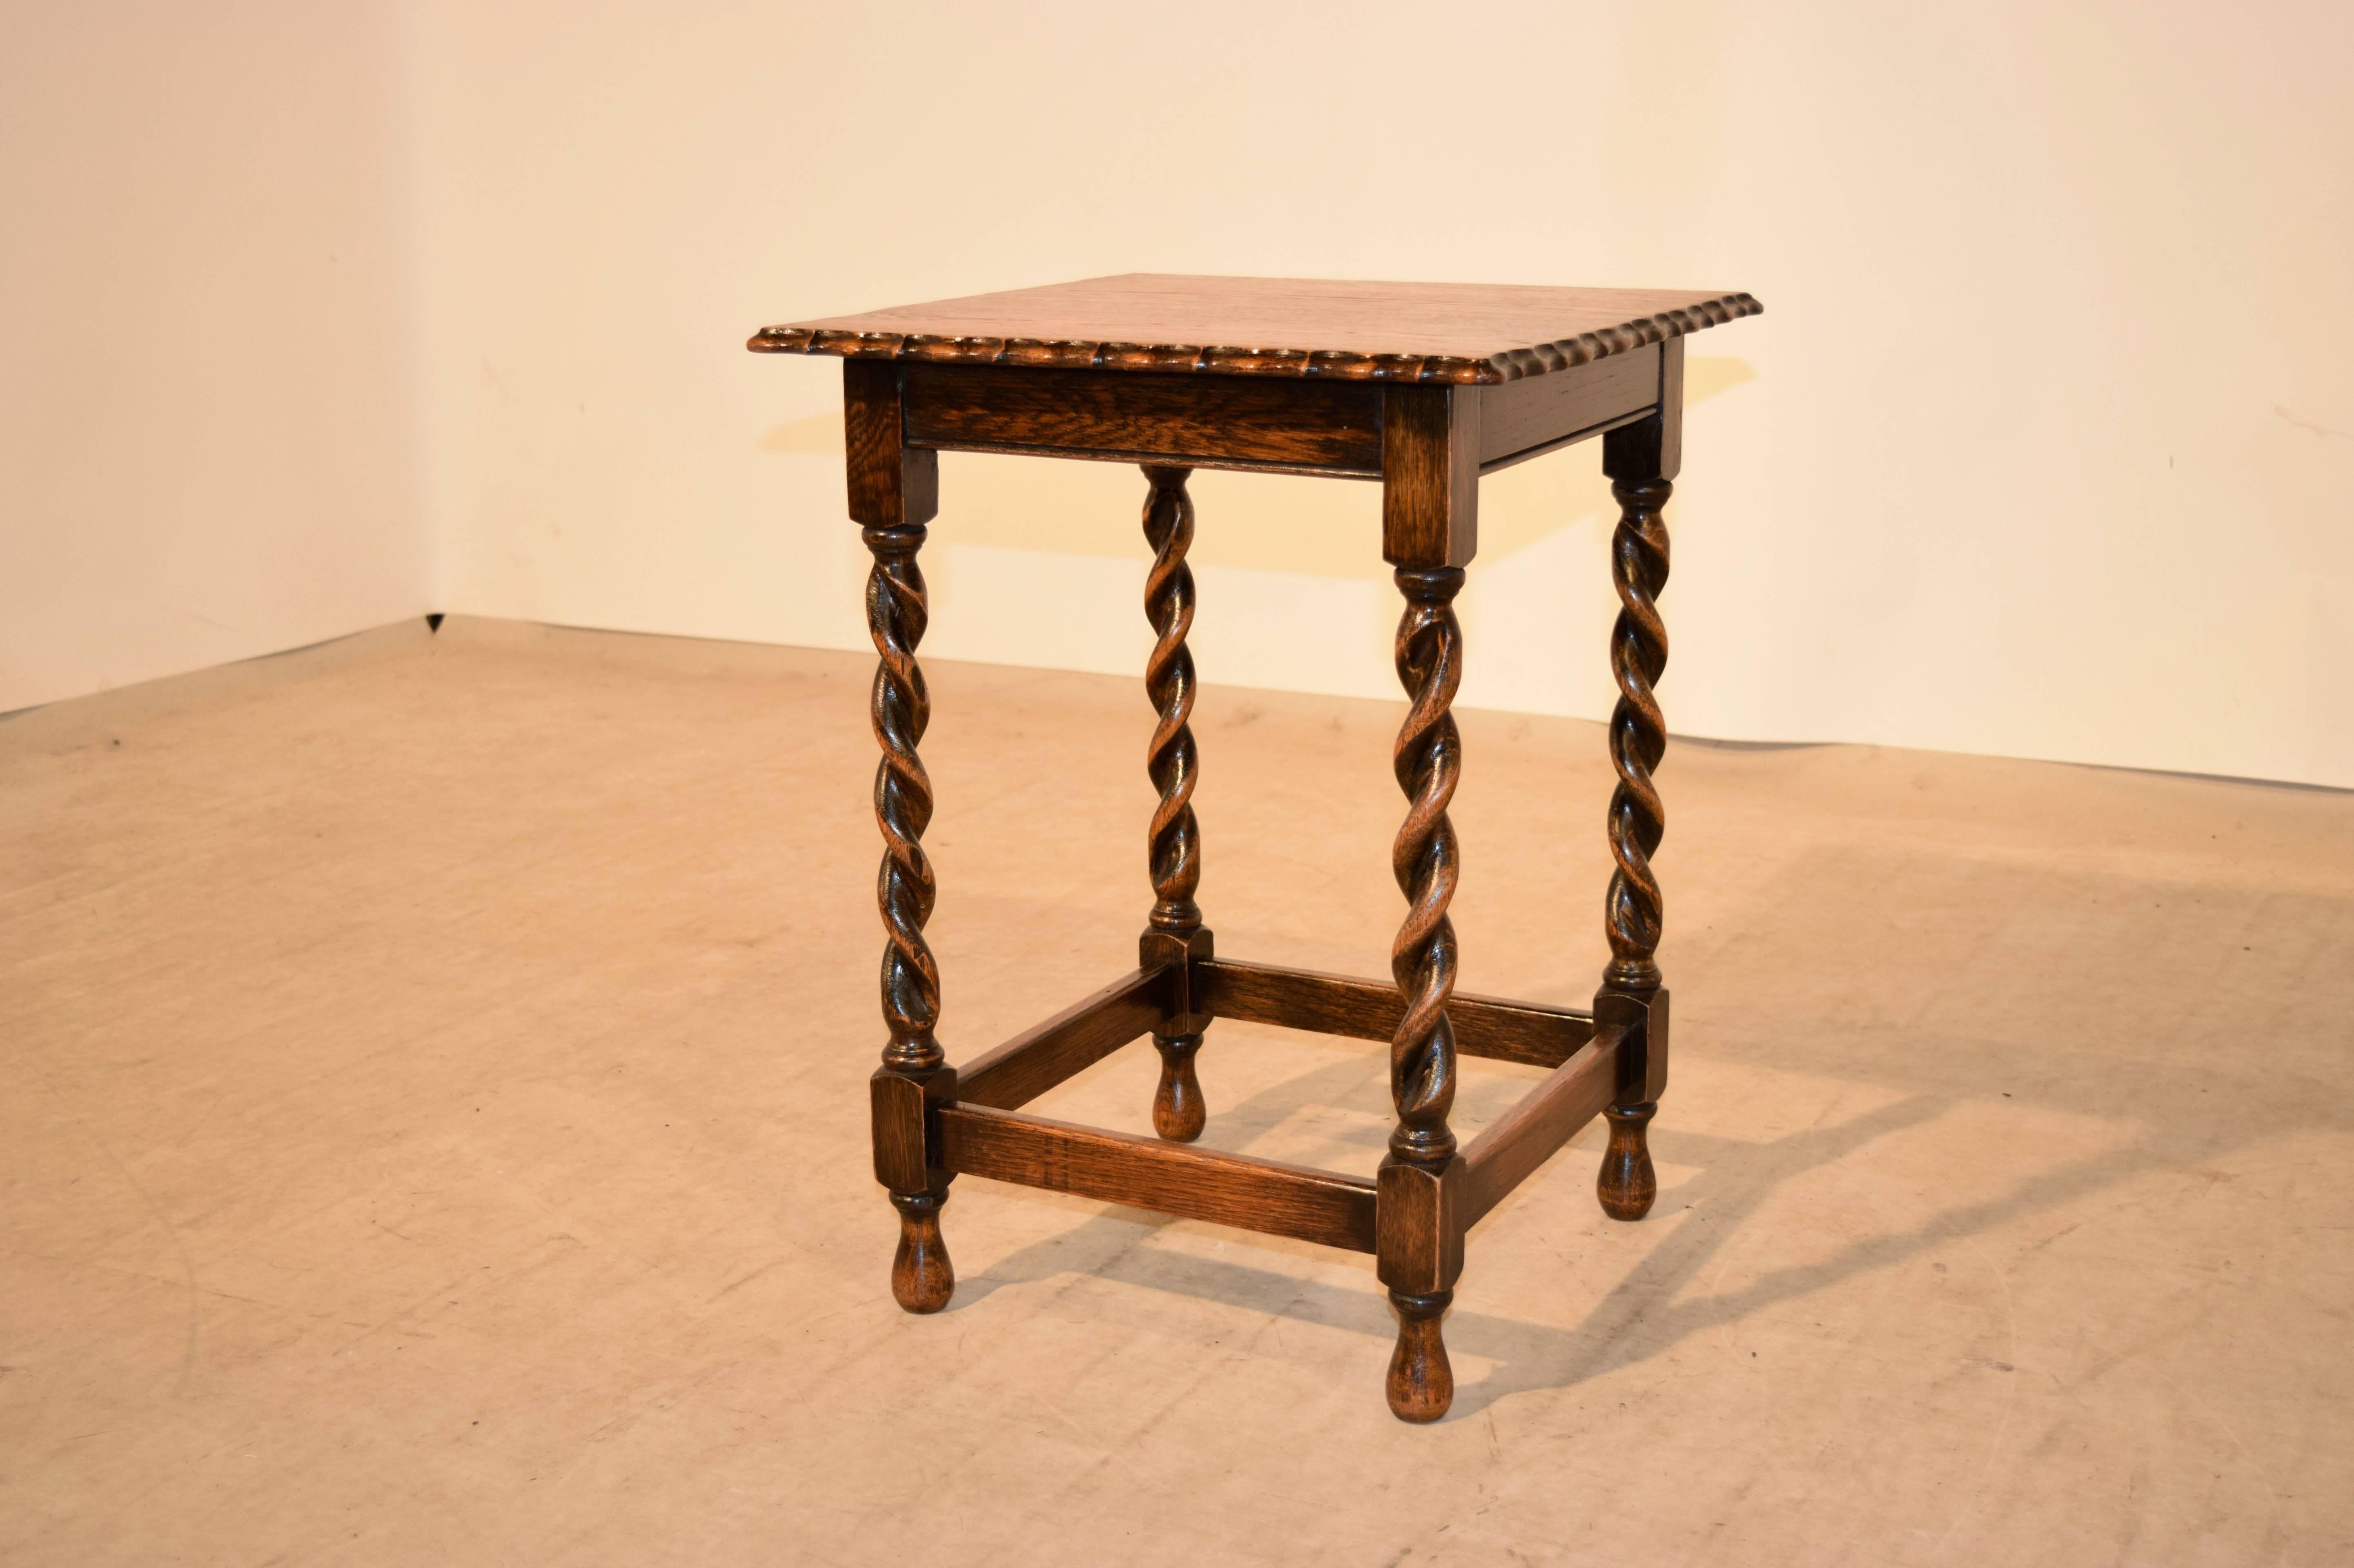 English oak occasional table, circa 1900. The top has a scalloped and beveled edge, and follows down to a simple apron and hand-turned barley twist legs which are joined by simple stretchers and raised on hand-turned feet.